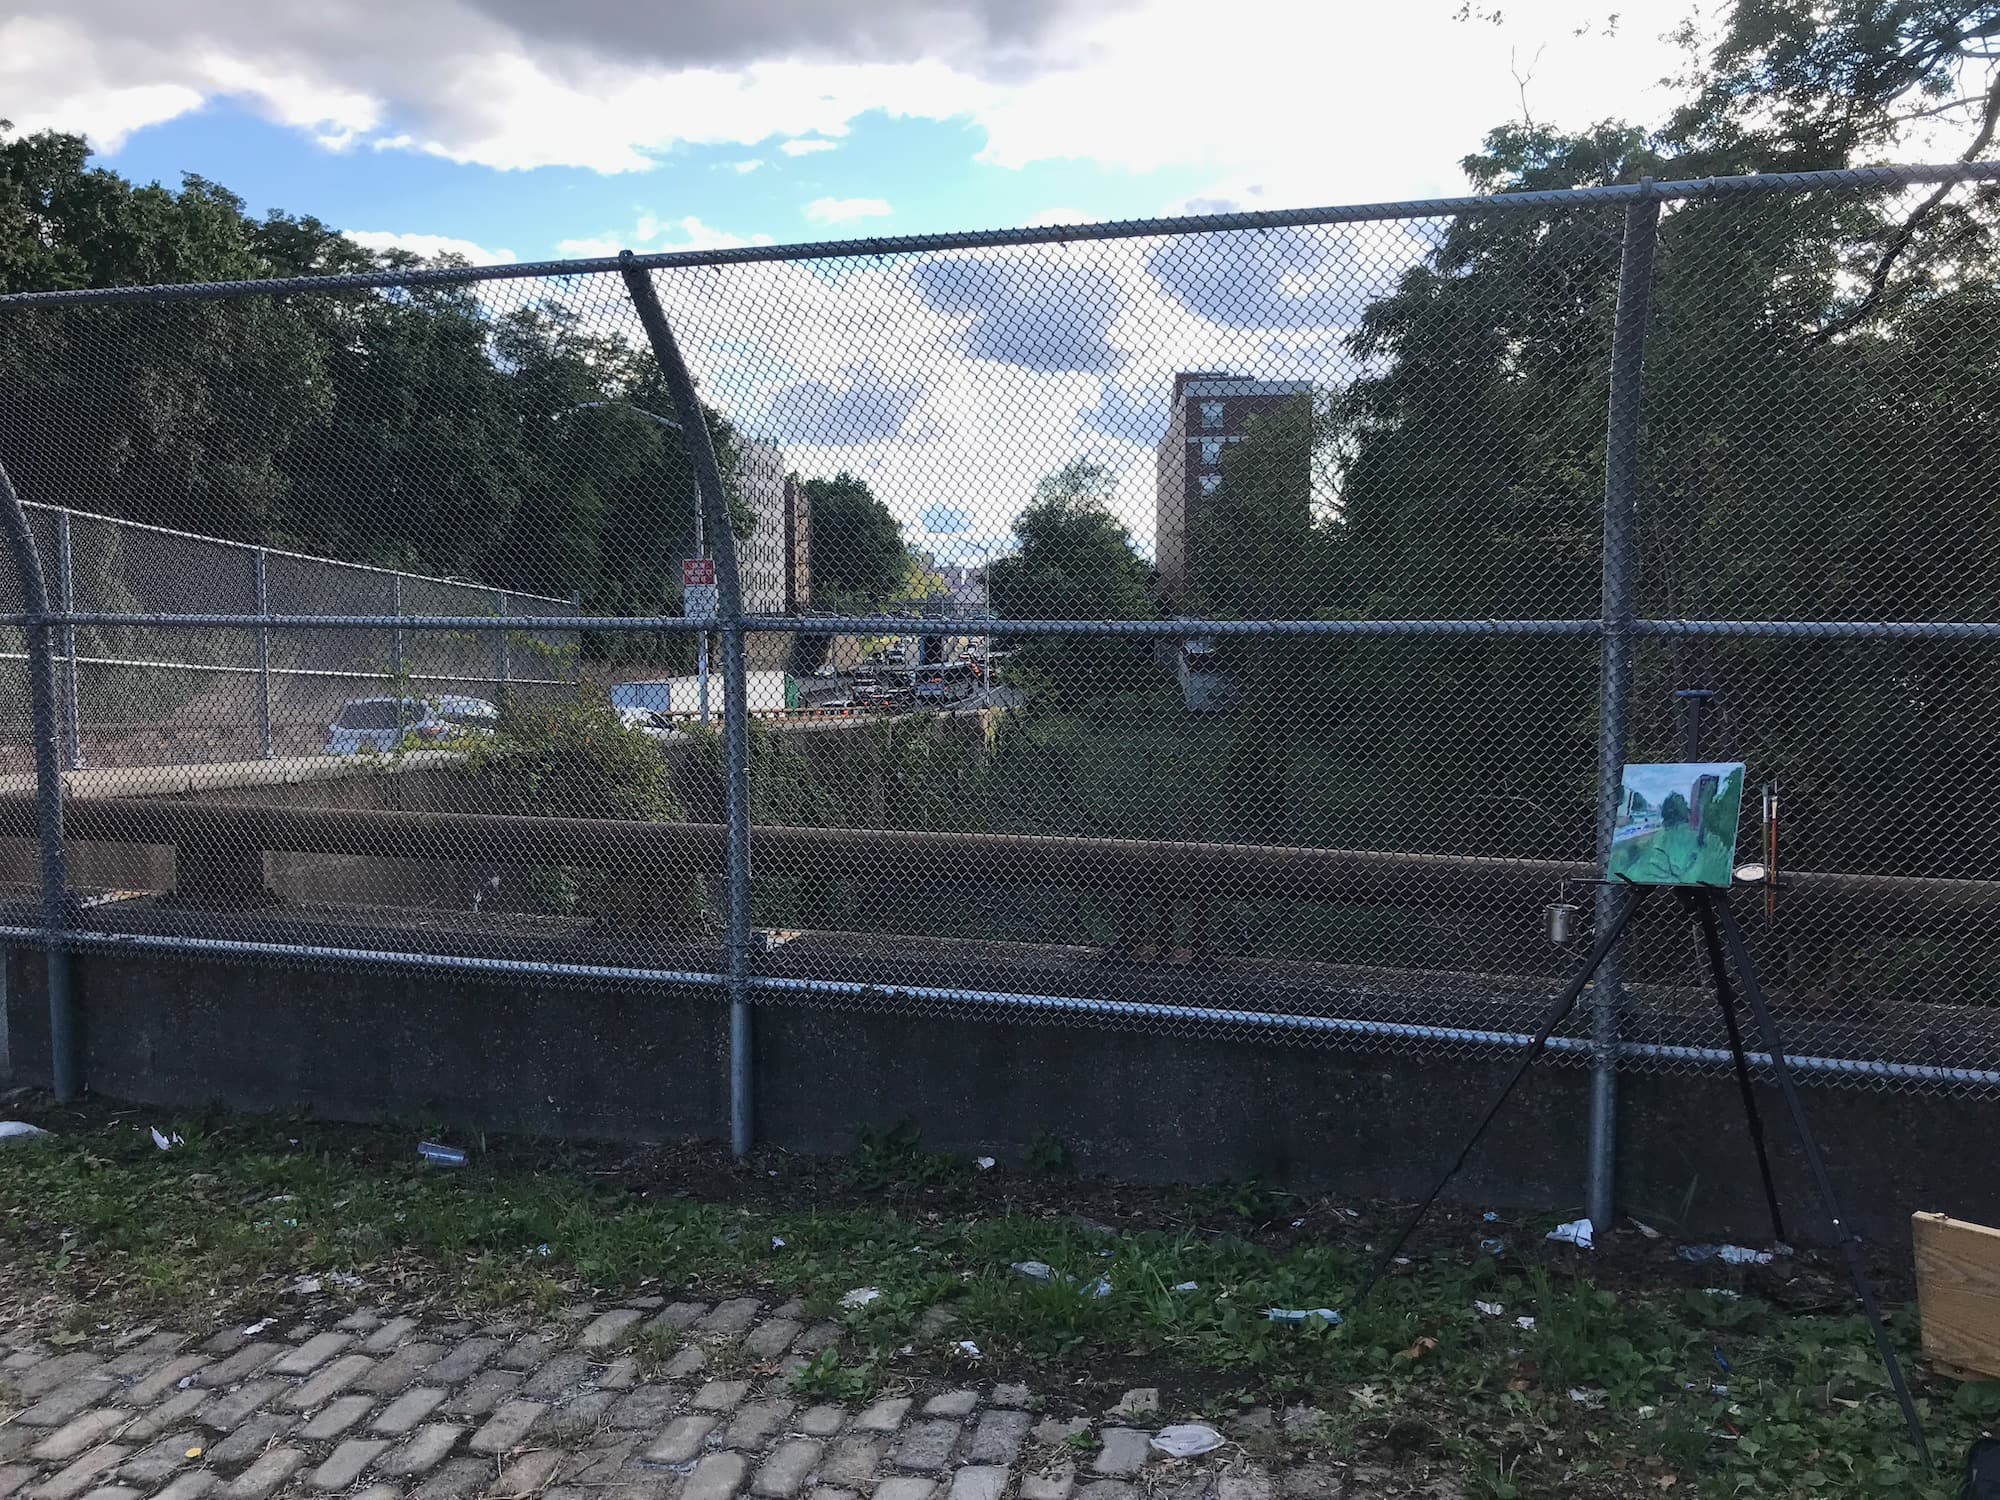 A plein air painting setup with canvas, easel, and paintbrushes against a backdrop of a chain link fence and urban greenery.